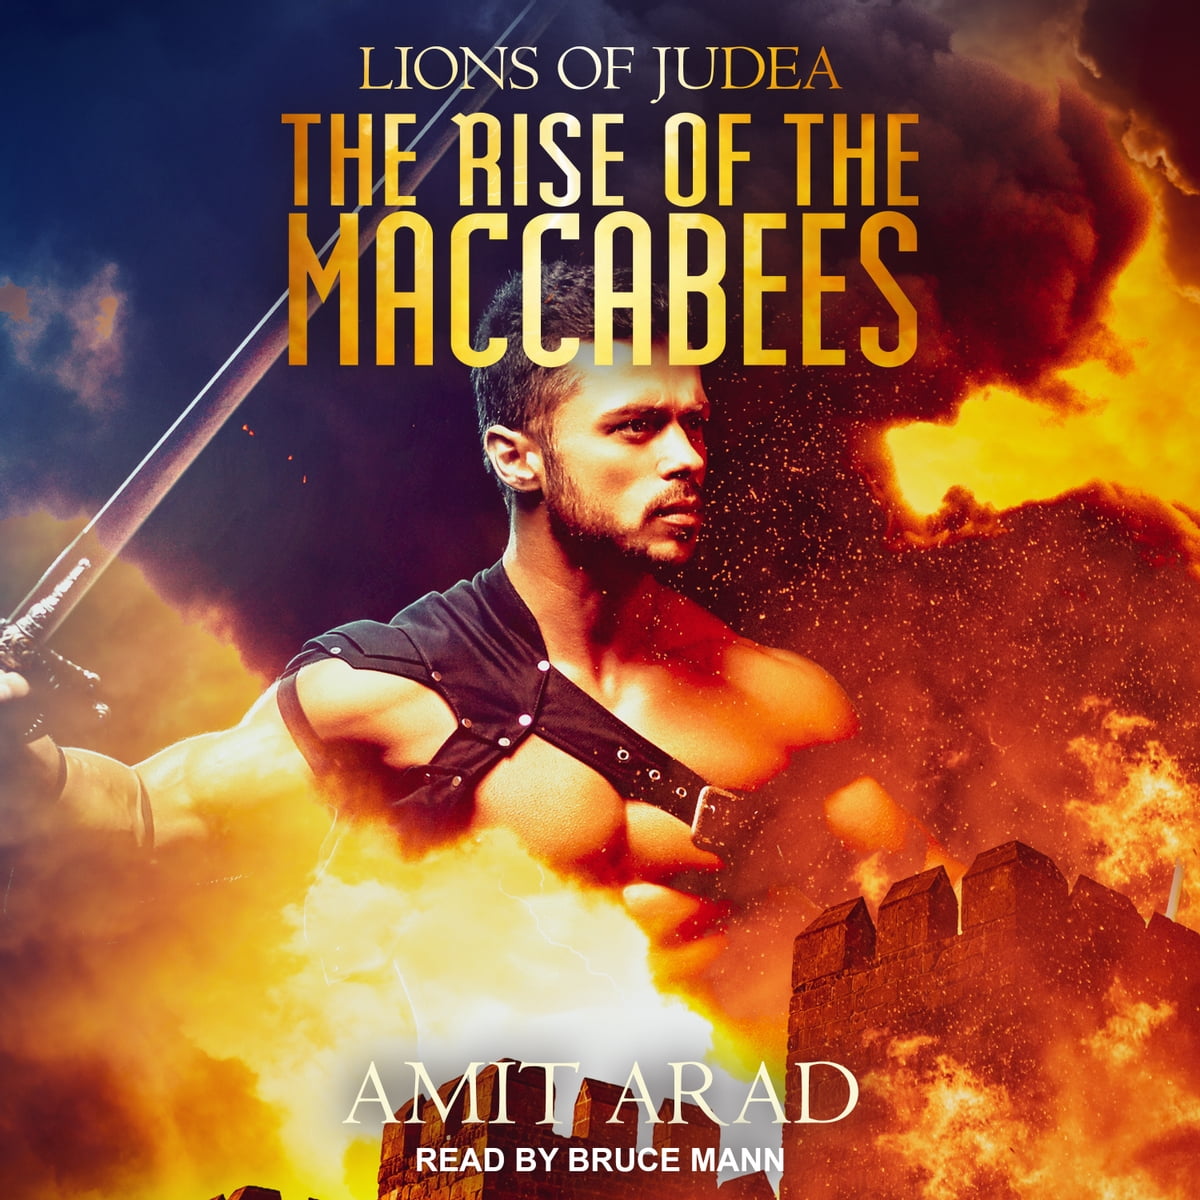 The rise of the maccabees audiobook by amit arad